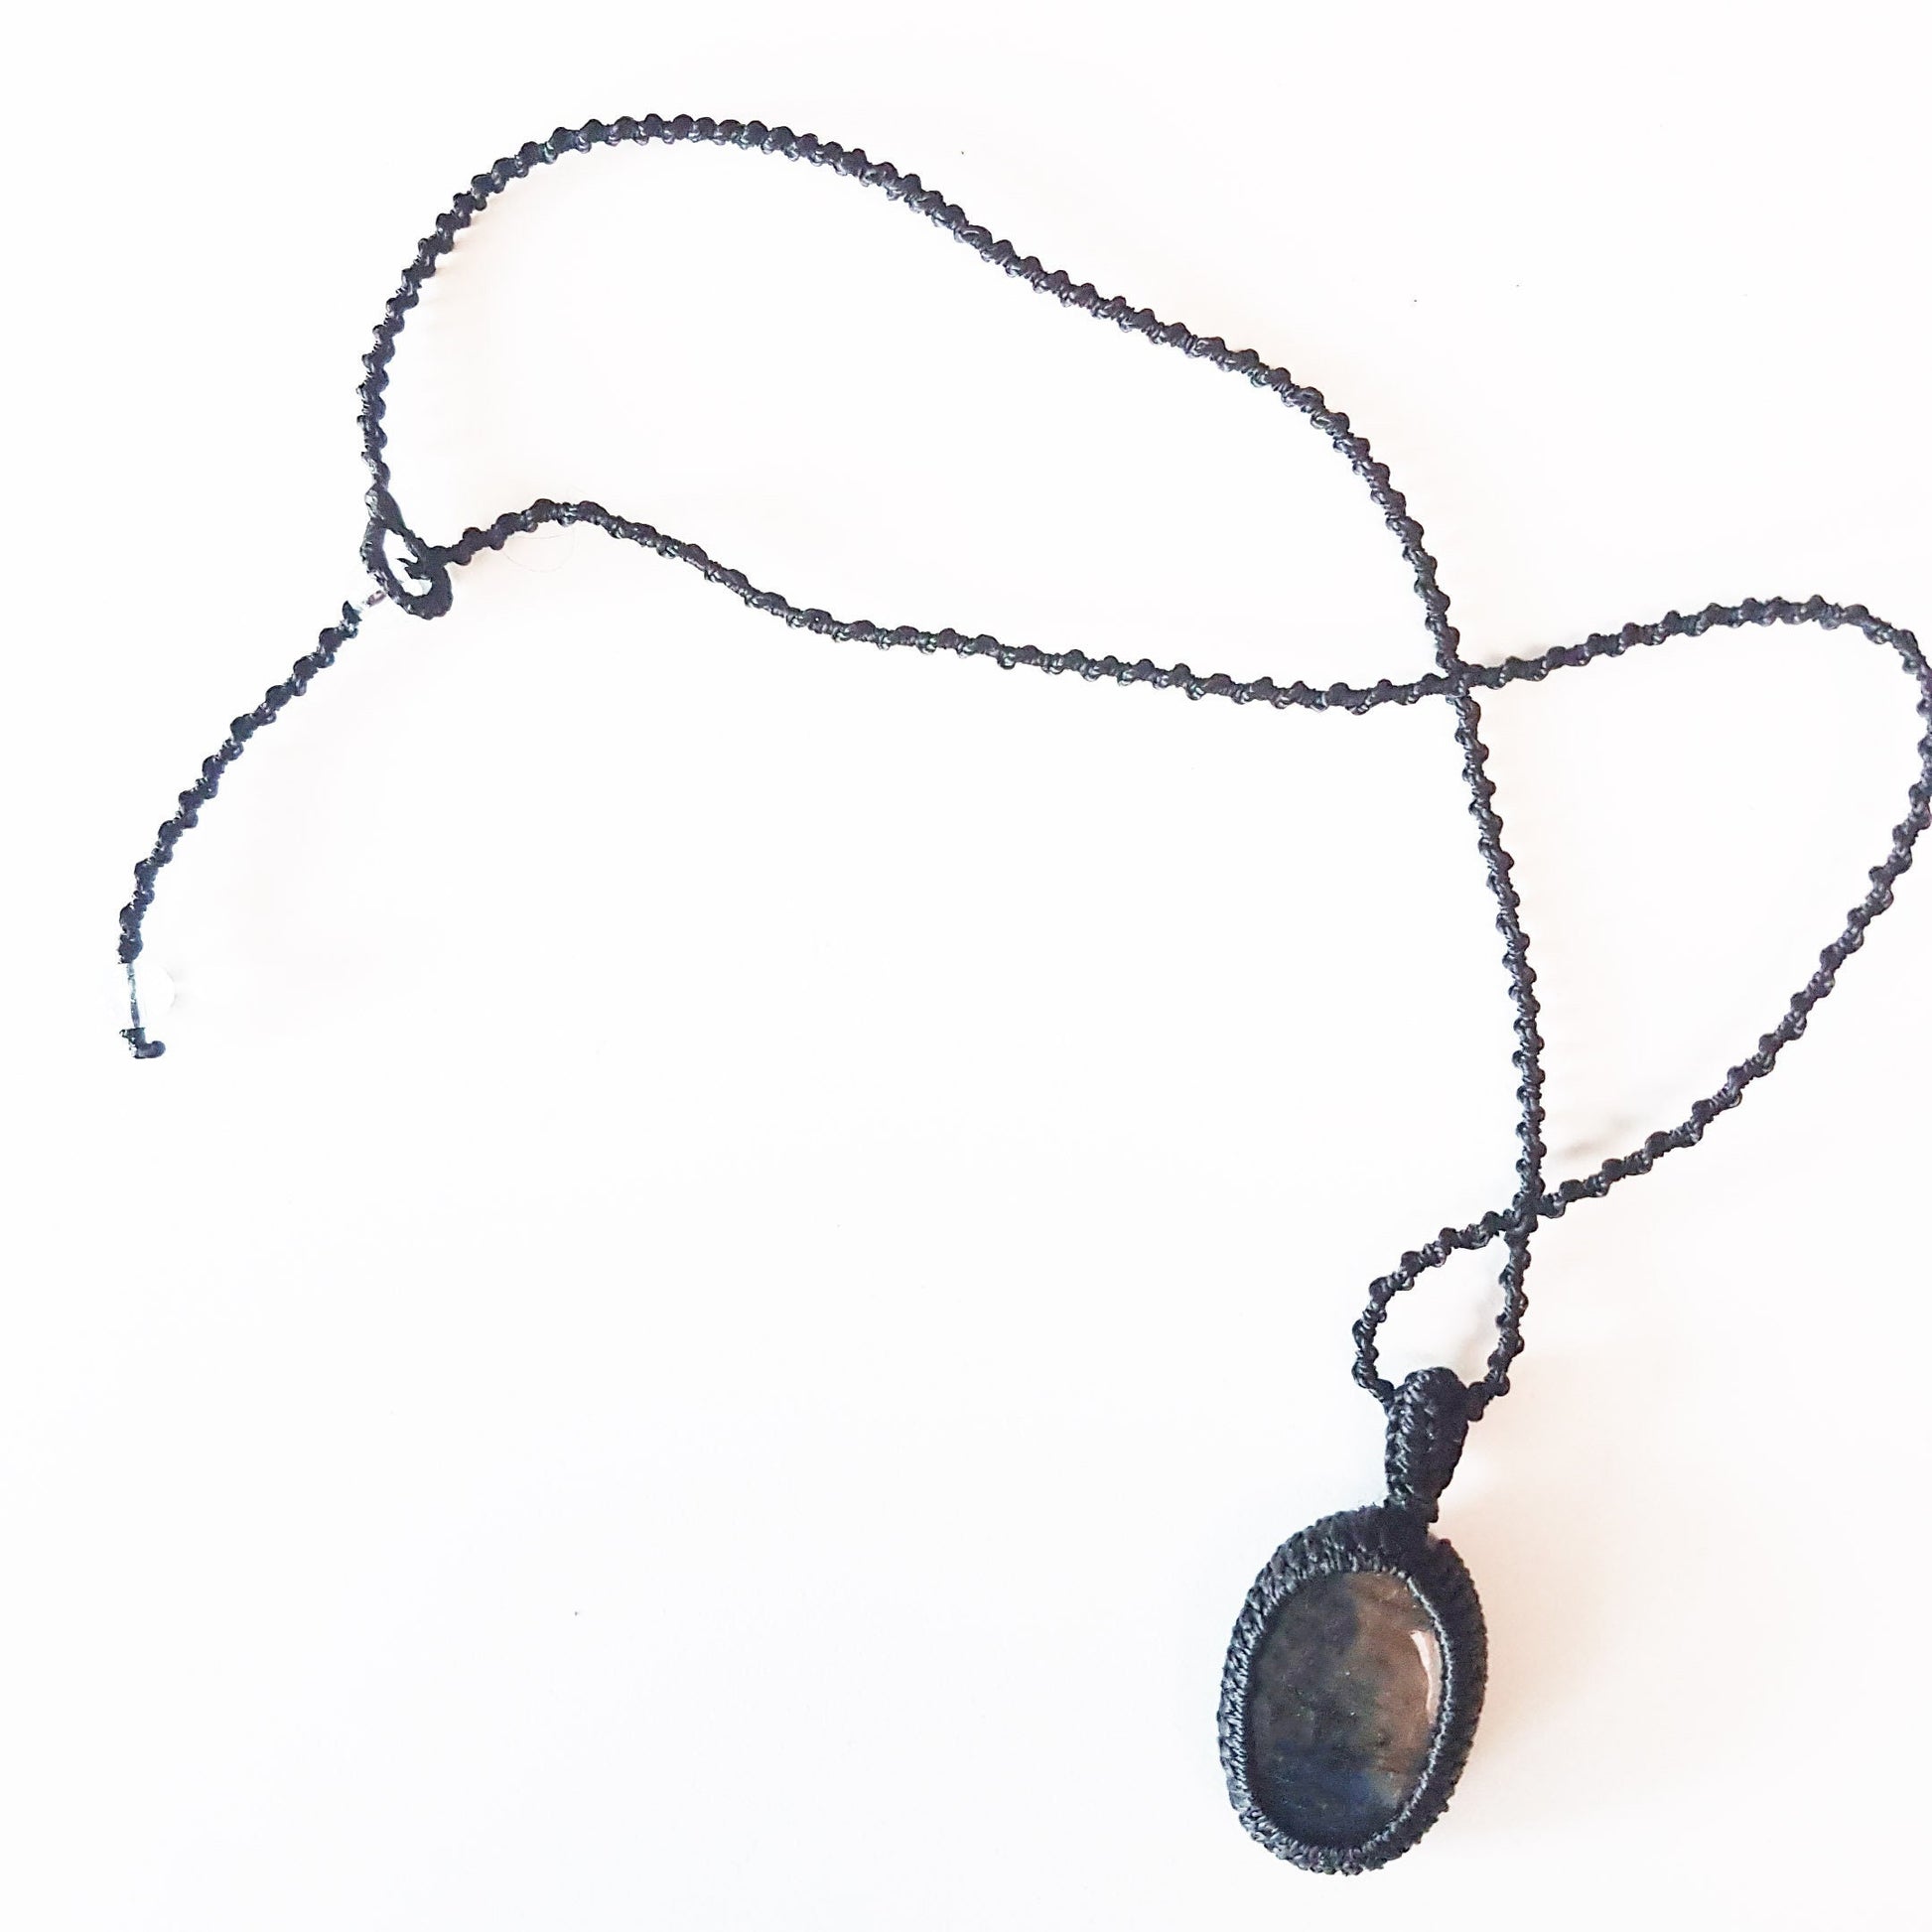 Gender neutral design labradorite pendant necklace. Hangs on a 20 inch black woven corkscrew knot cord. Adjustable length. Unisex jewelry. - Vintage India Ca